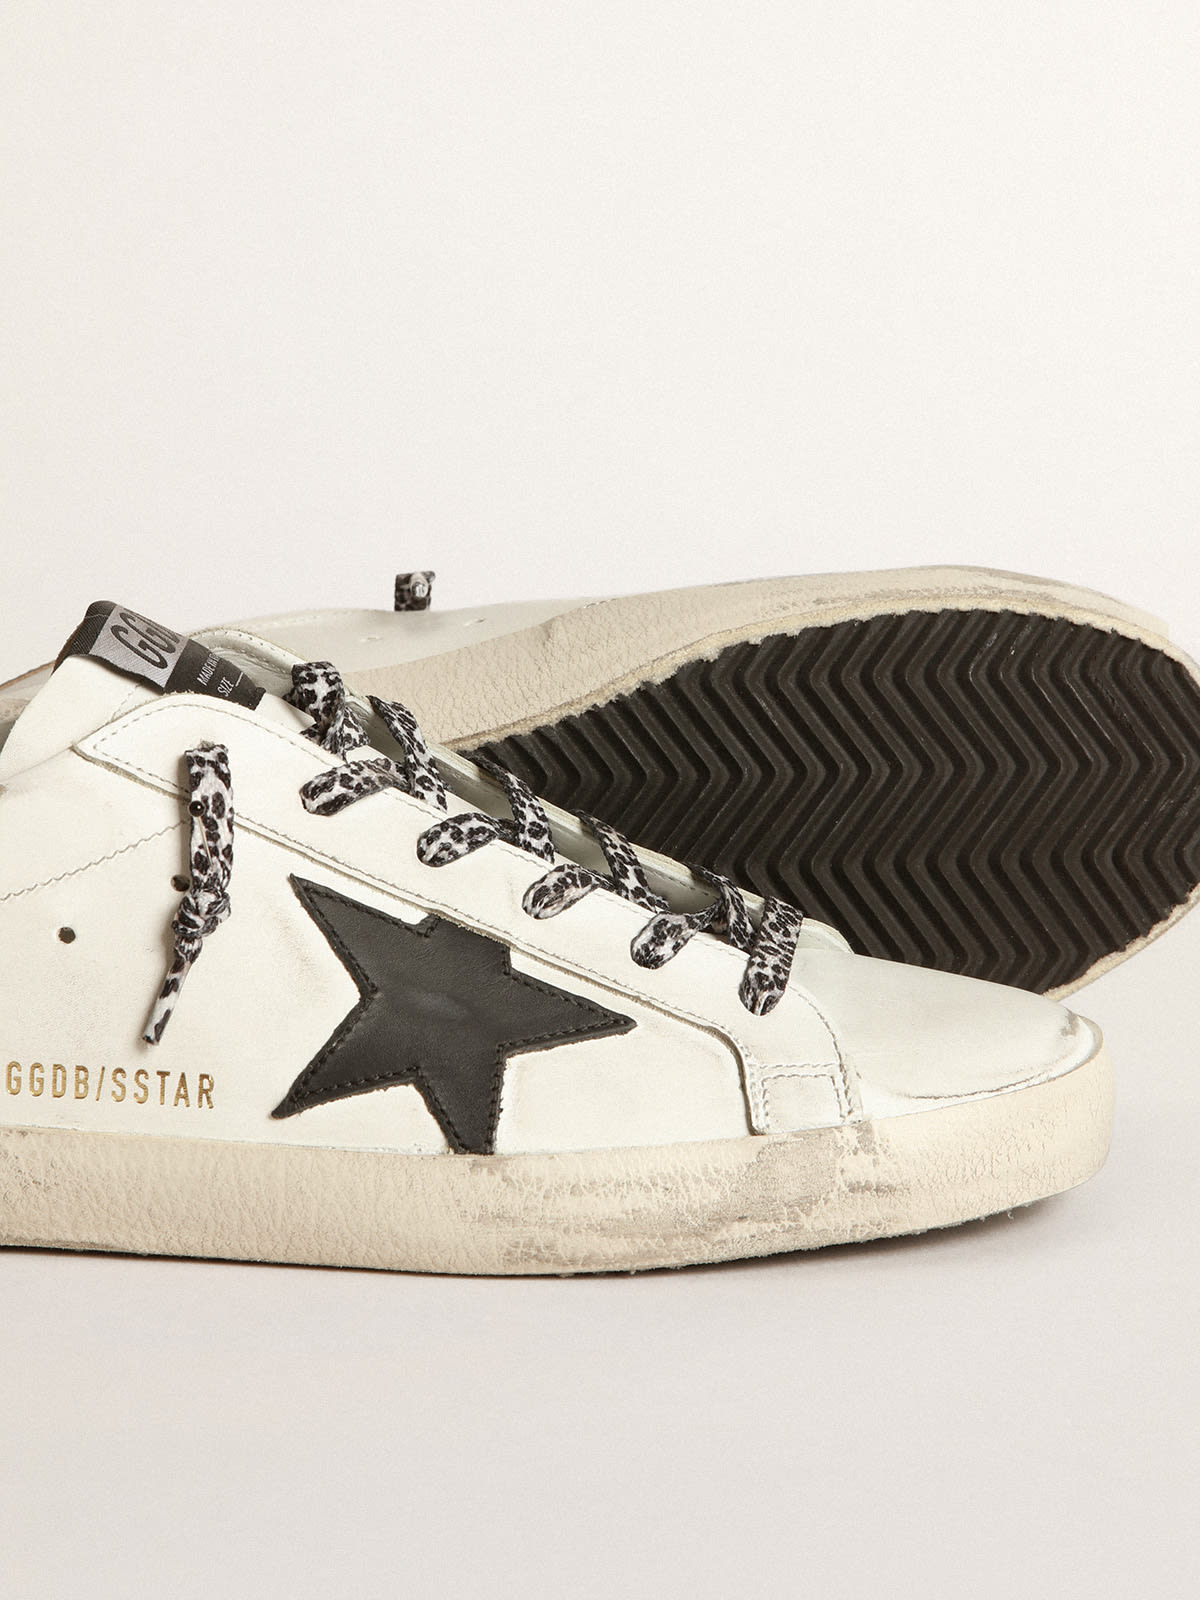 Golden Goose - White Super-Star sneakers with black star and leopard-print laces in 